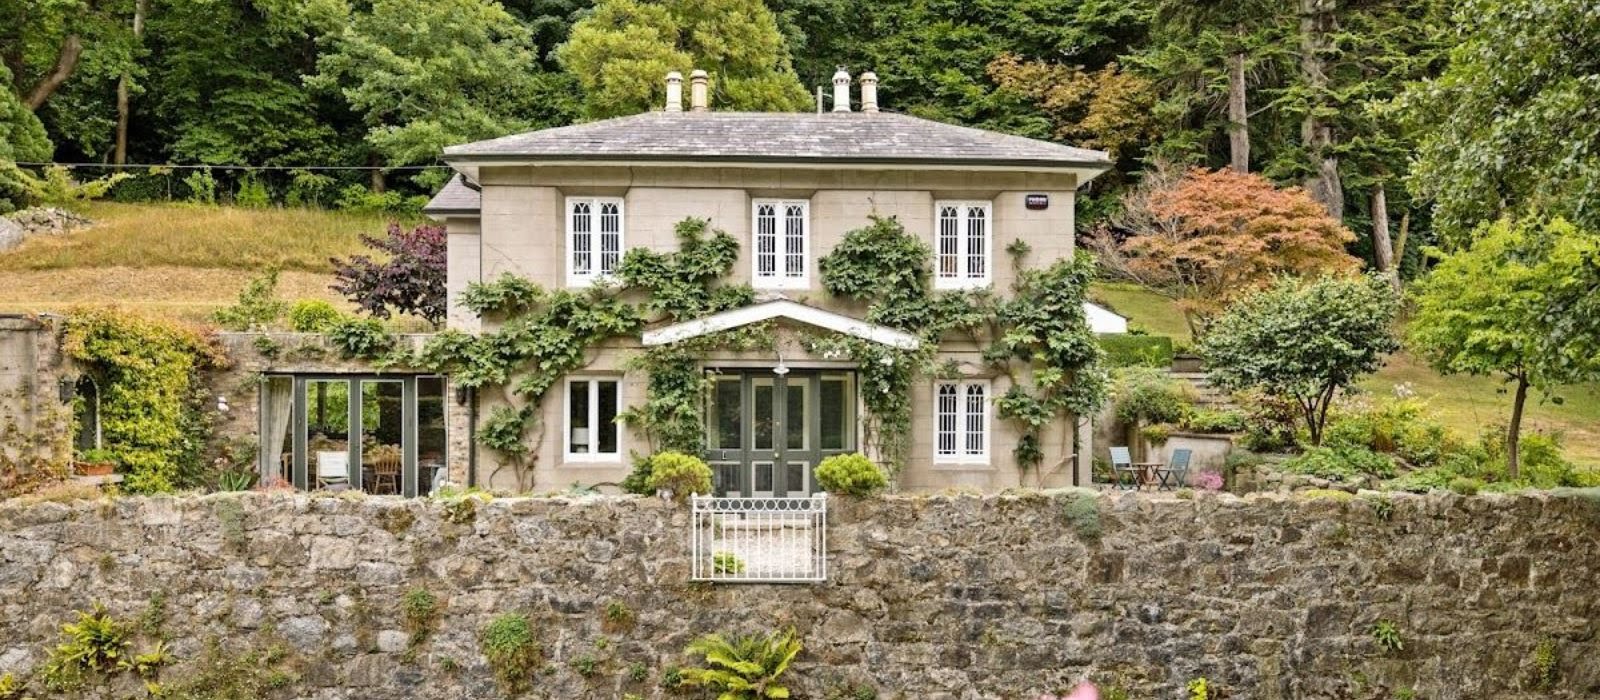 This incredible Wicklow period property is on sale for €1.2 million